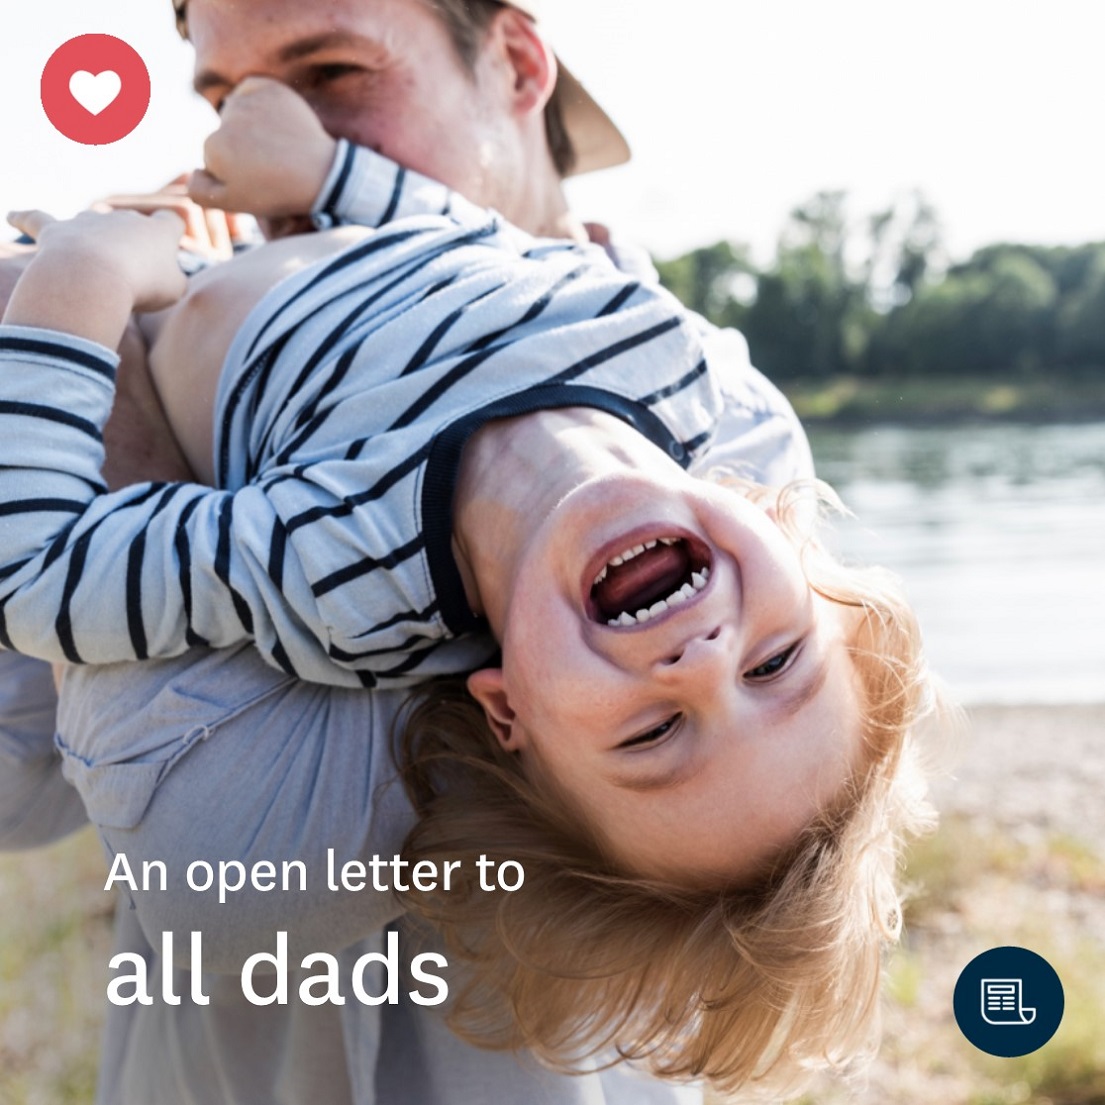 An open letter to all dads